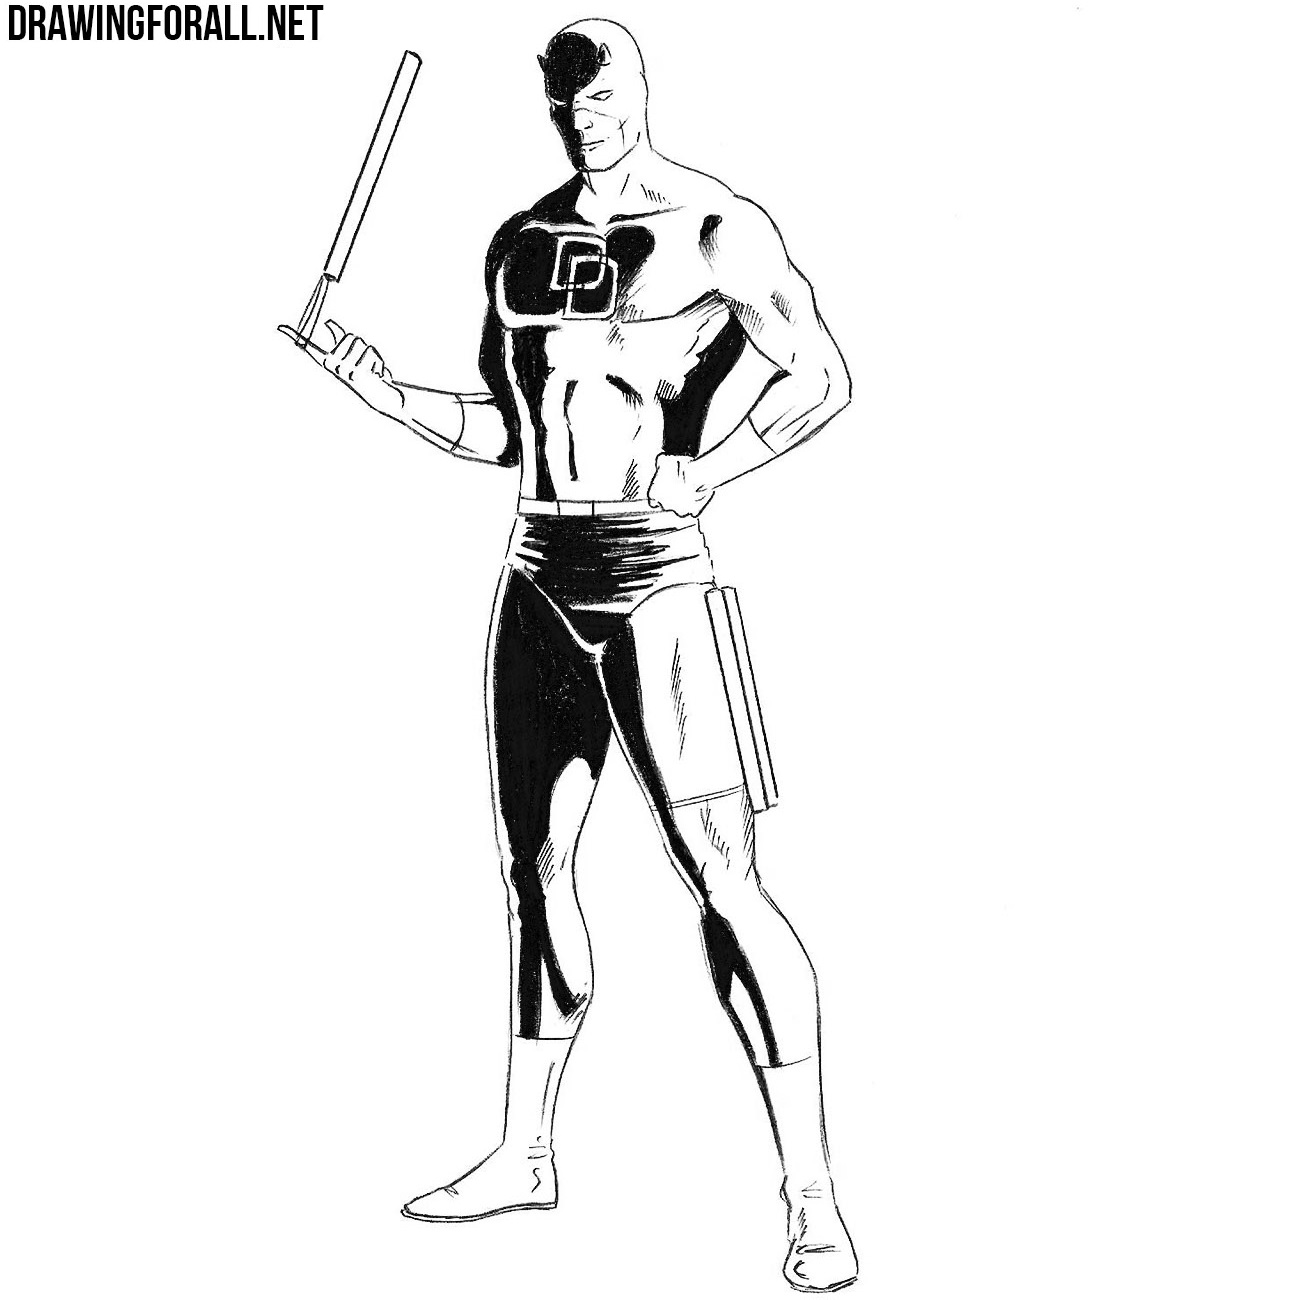 How to Draw Daredevil Drawingforall.net